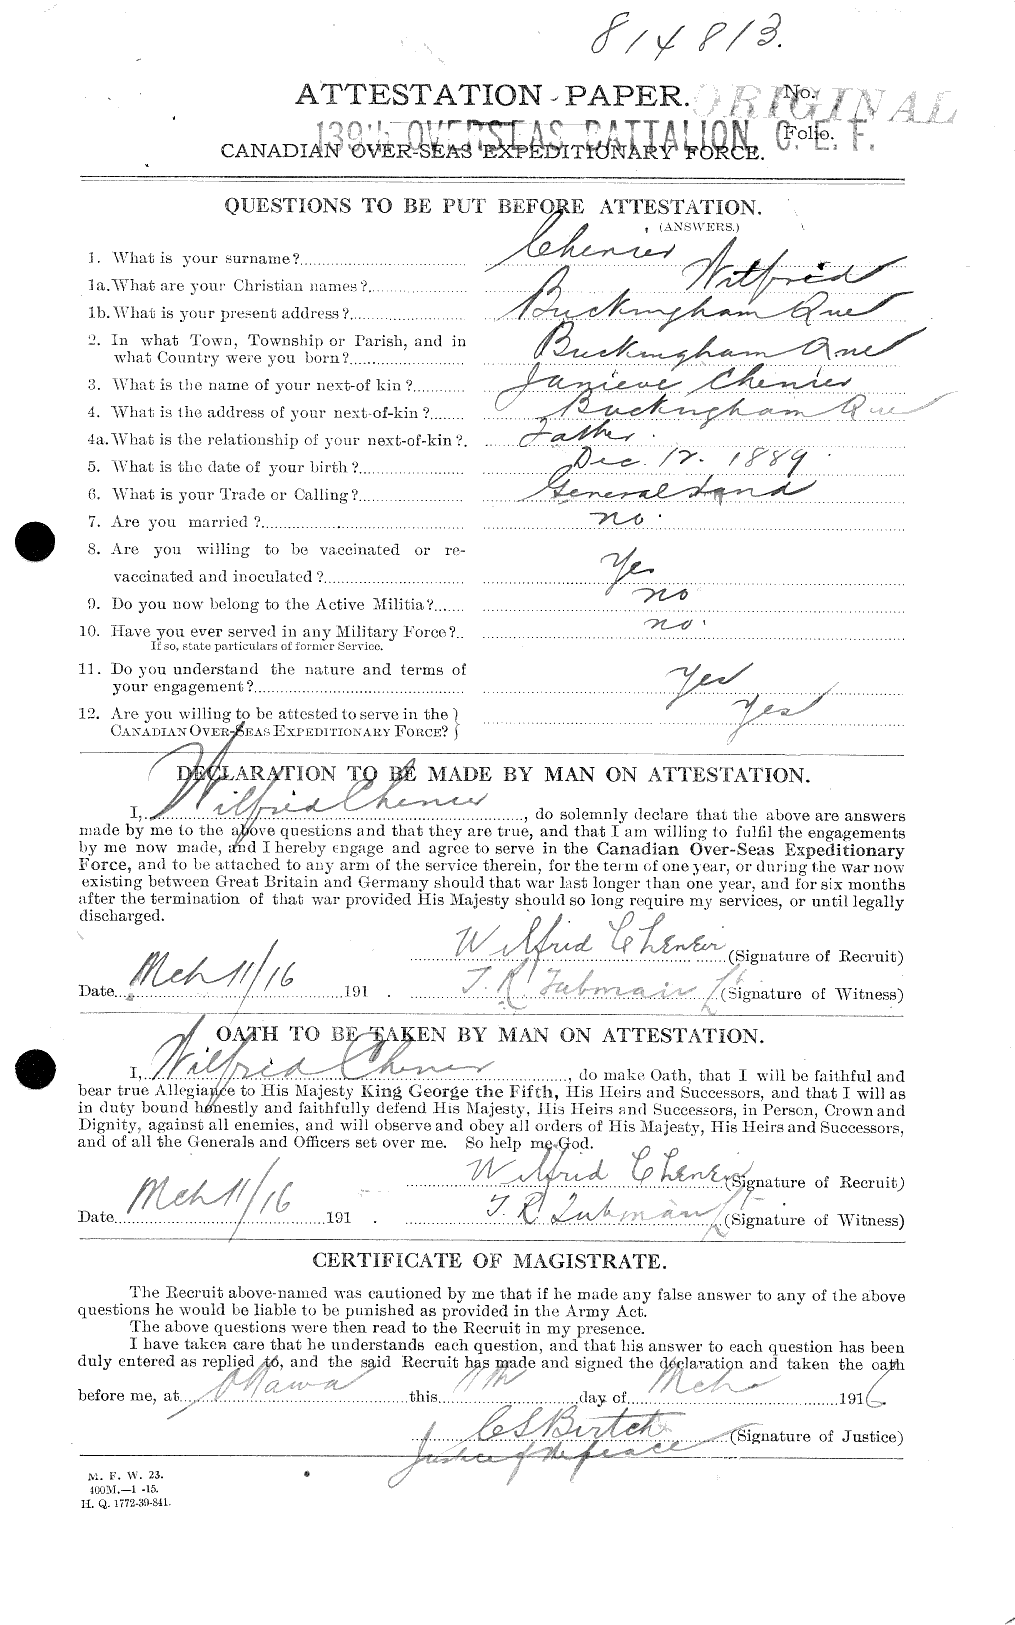 Personnel Records of the First World War - CEF 017439a